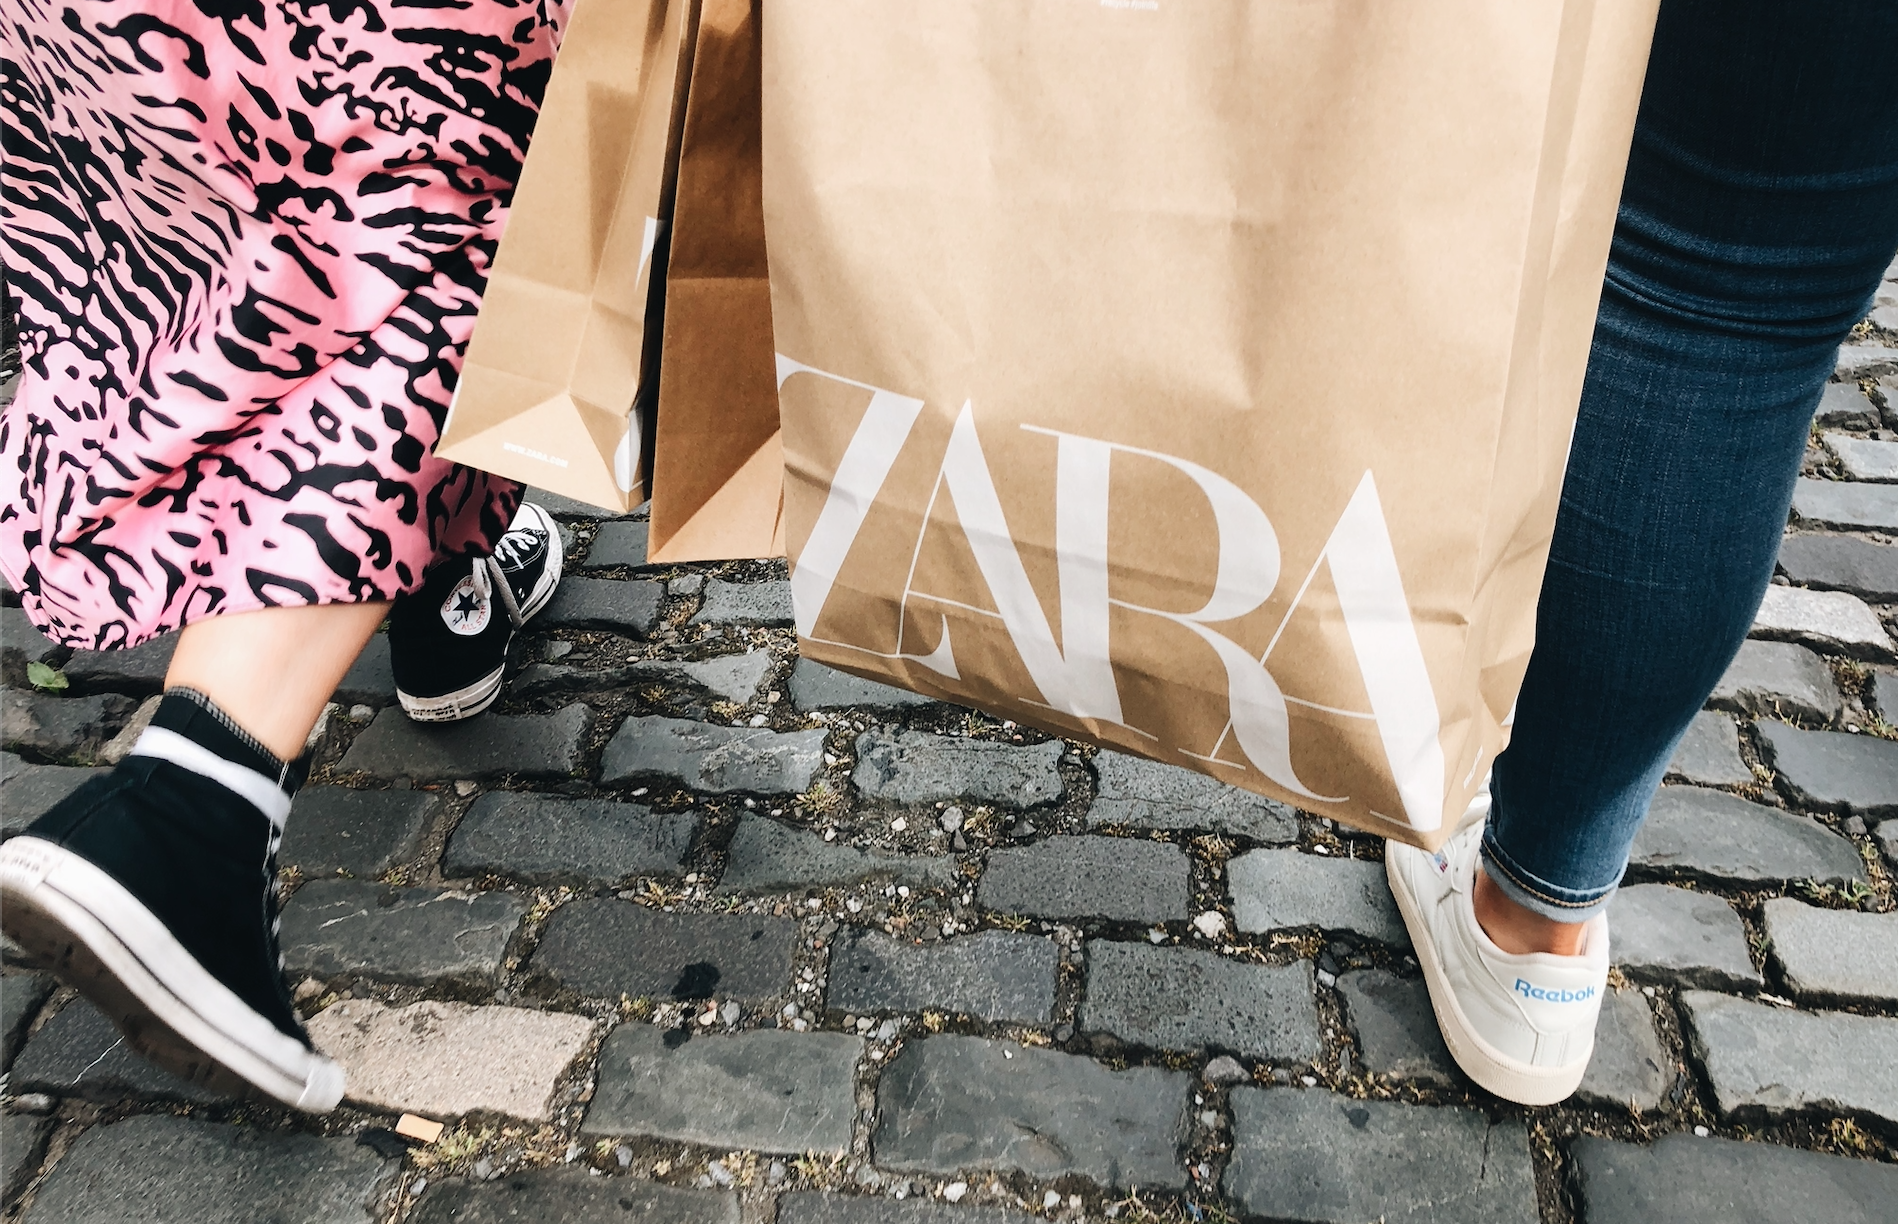 Bargain of the week has to be the Zara sandals reduced to just €23